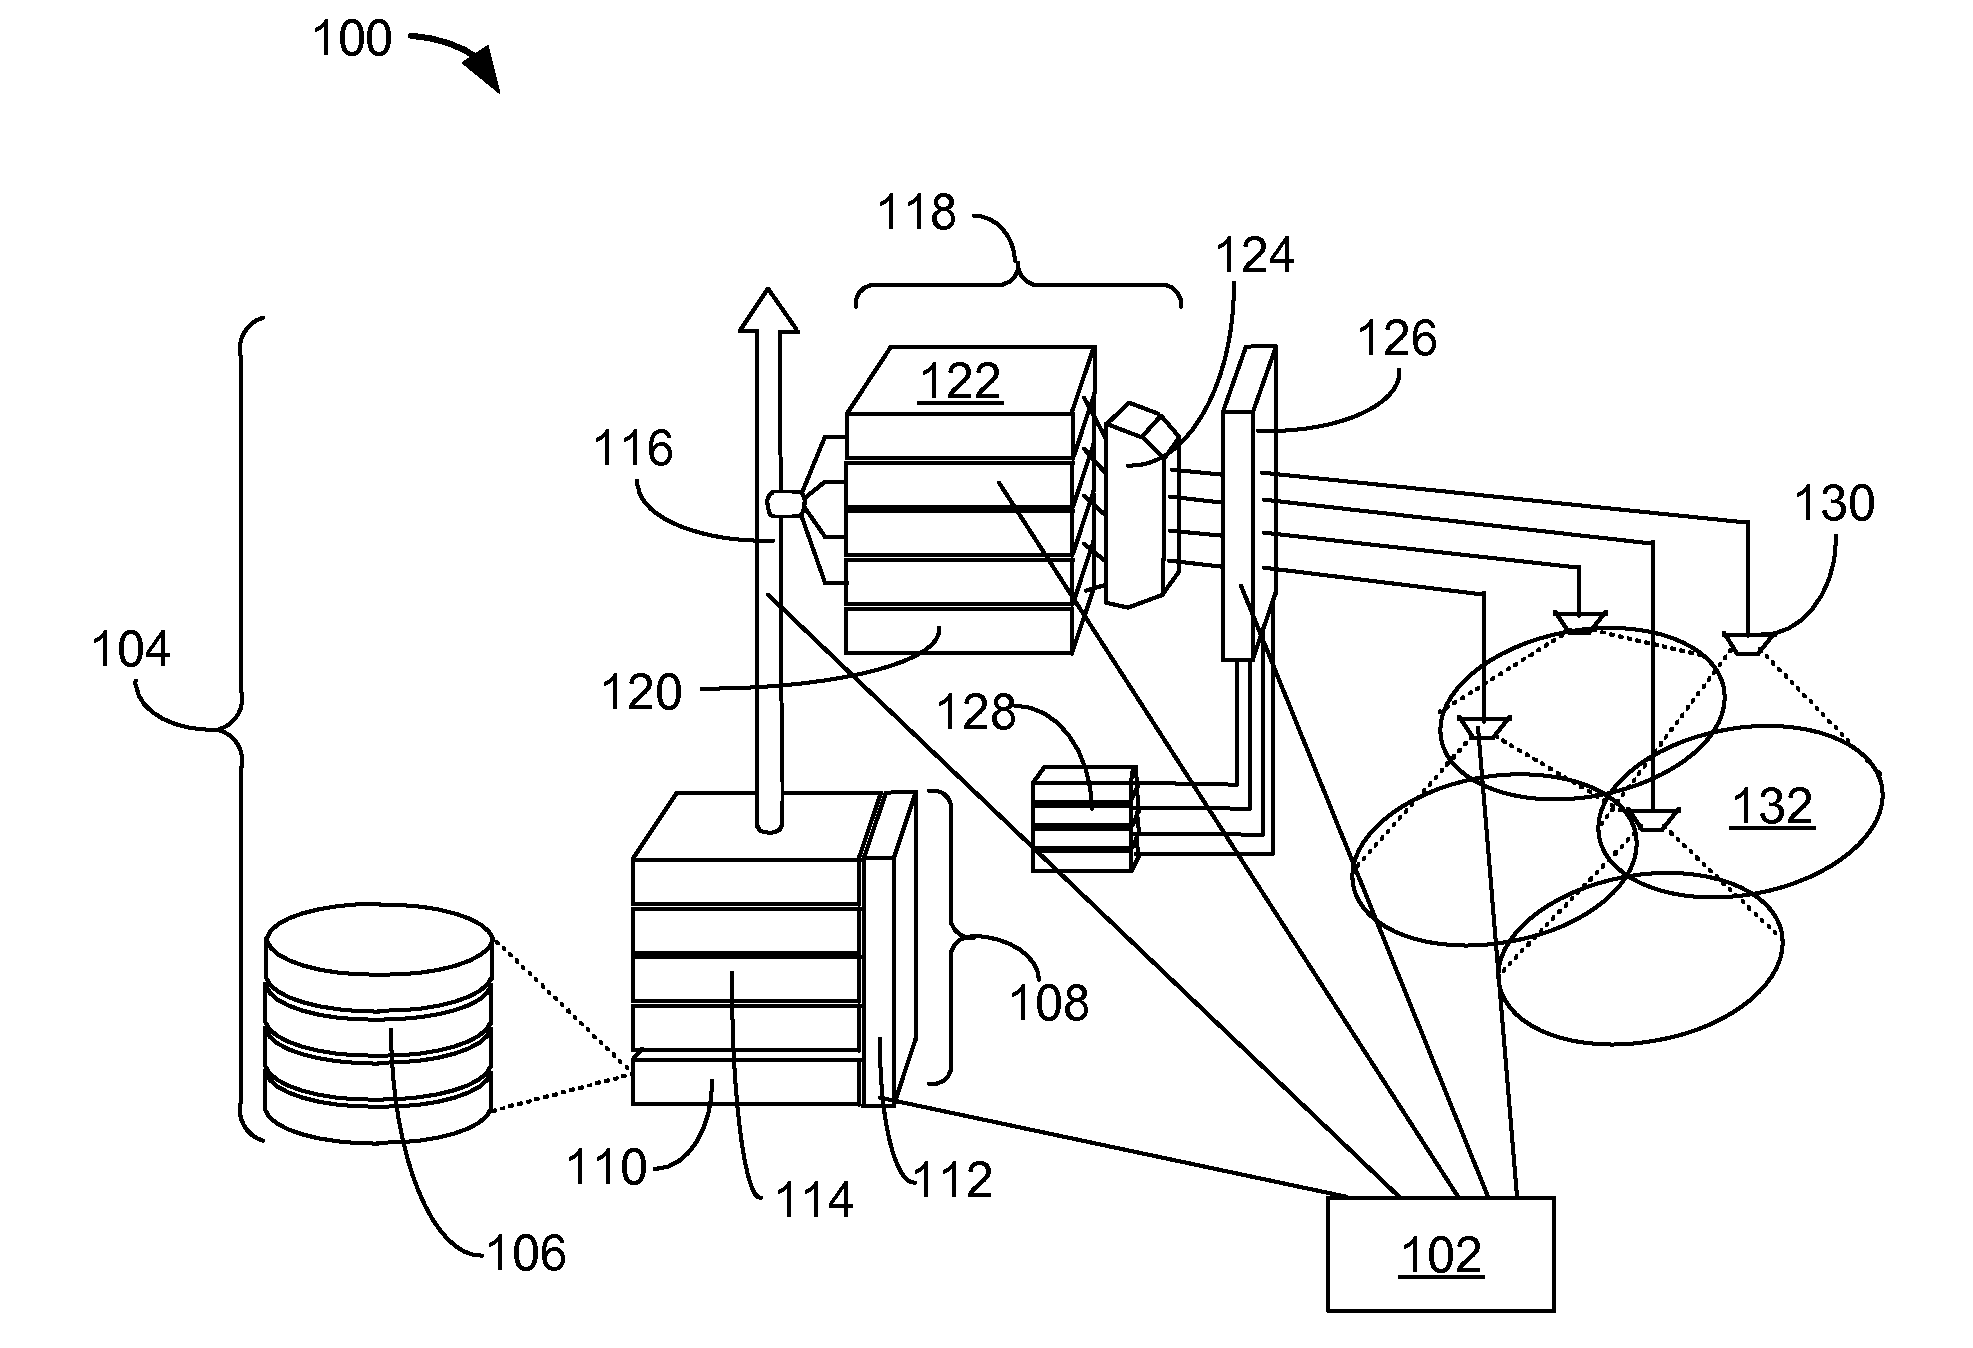 Network profiling system having physical layer test system